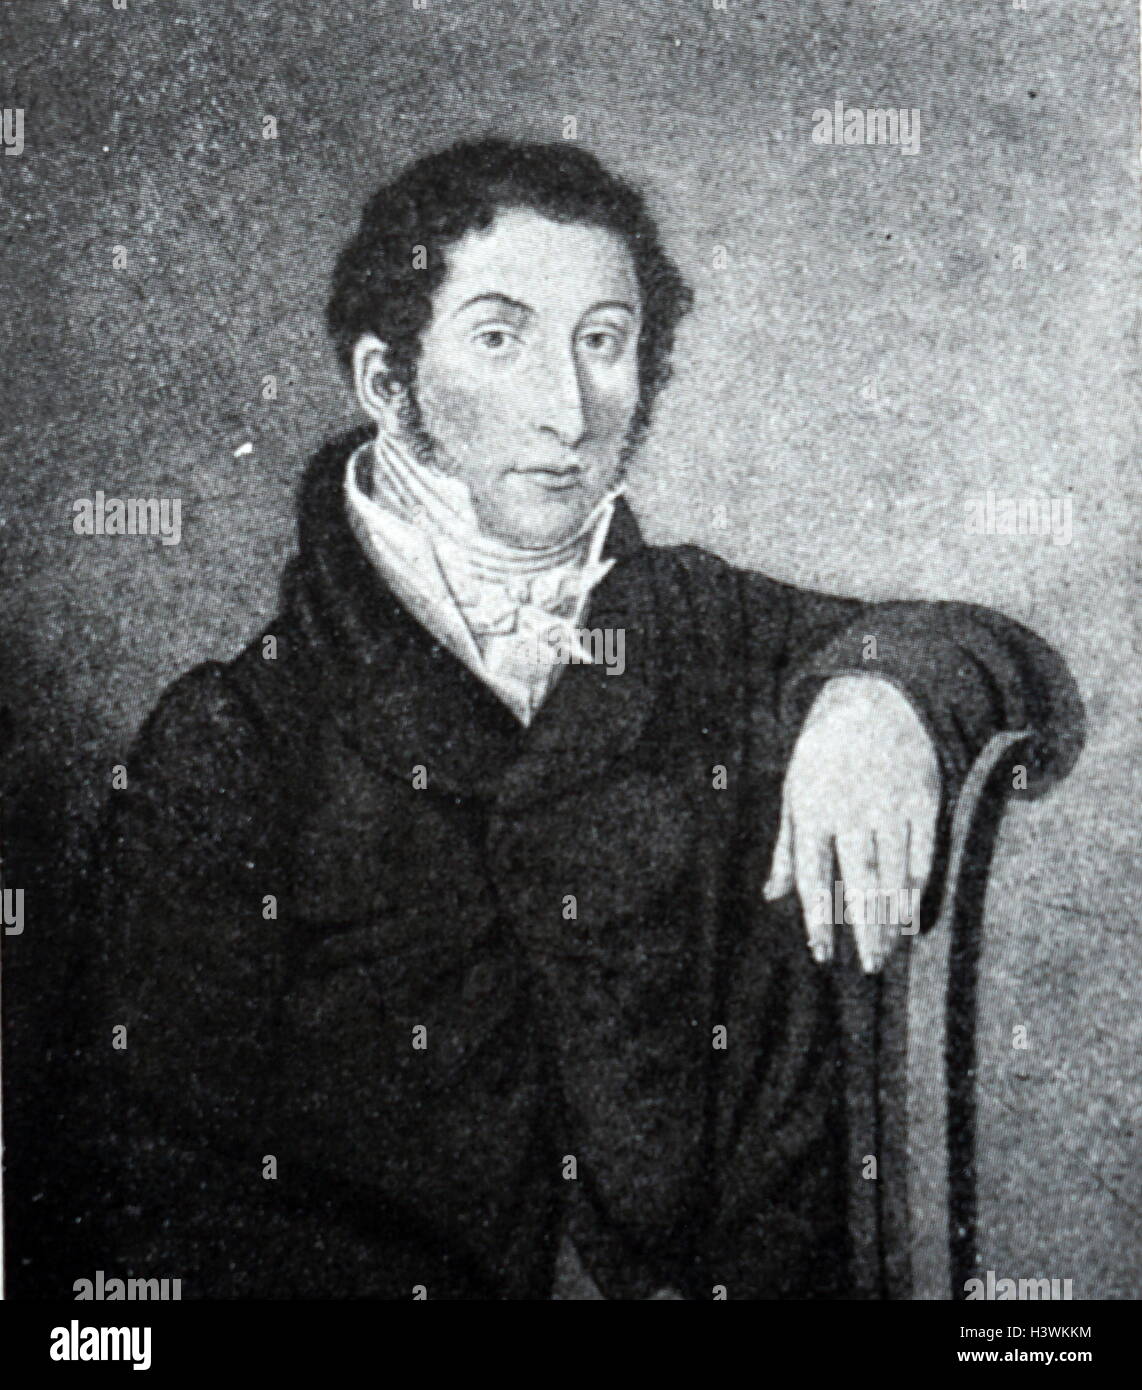 Portrait of Carl Maria von Weber (1786-1826) a German composer, conductor pianist, guitarist and critic. Dated 19th Century Stock Photo